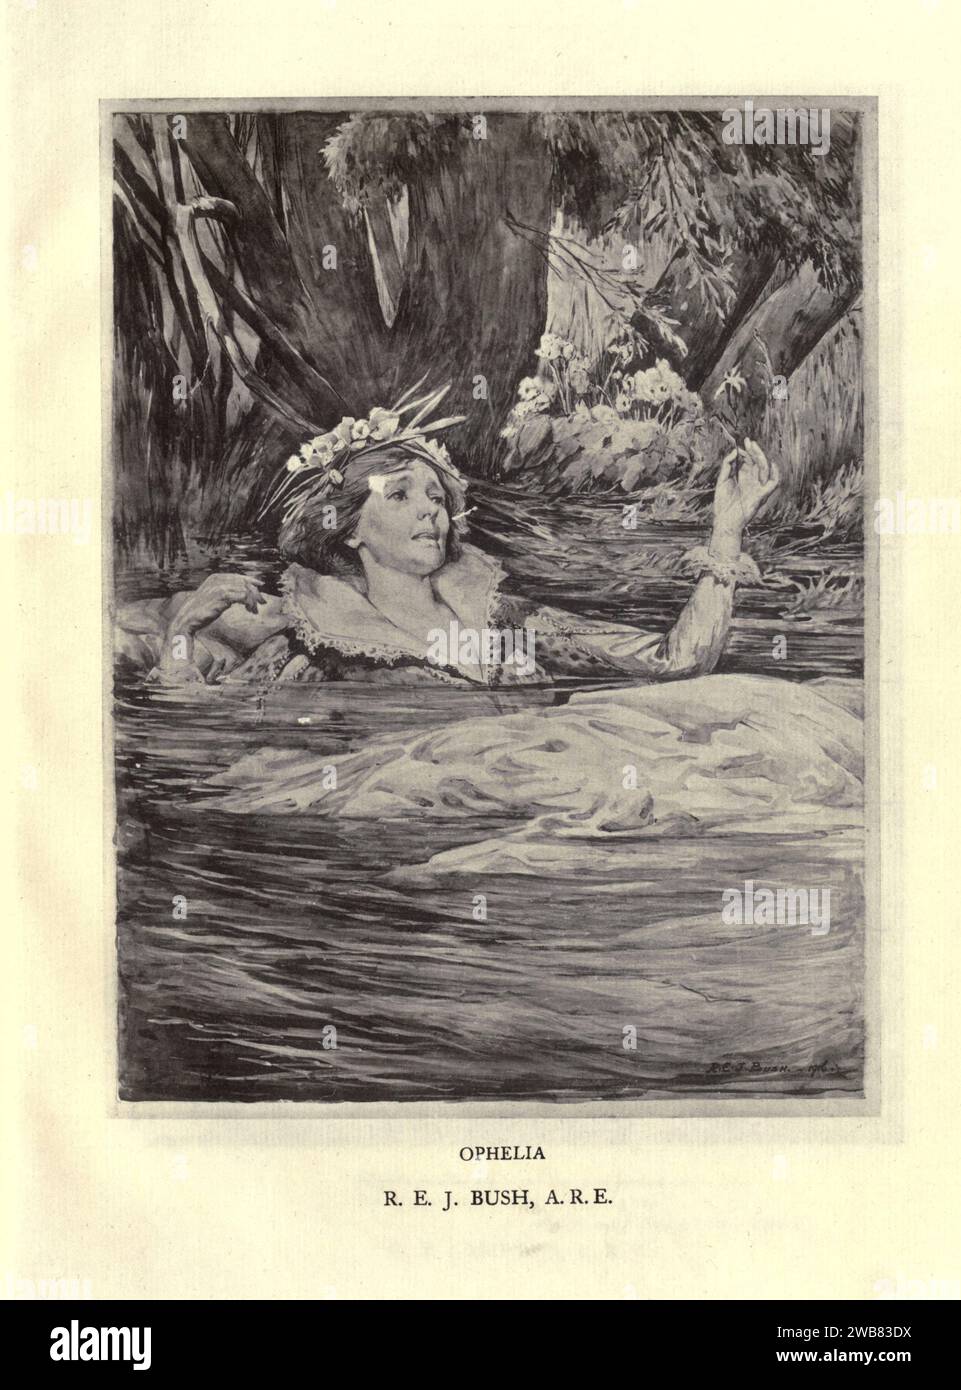 Ophelia. [Hamlet] by R. E. J. BUSH, from A Tribute to the genius of William Shakespeare; being the programme of a performance at Drury Lane Theatre on May 2, 1916, the tercentenary of his death; humbly offered by the players and their fellow-workers in the kindred arts of music & painting MACMILLAN AND CO., LIMITED ST. MARTIN'S STREET, LONDON 1916 Stock Photo